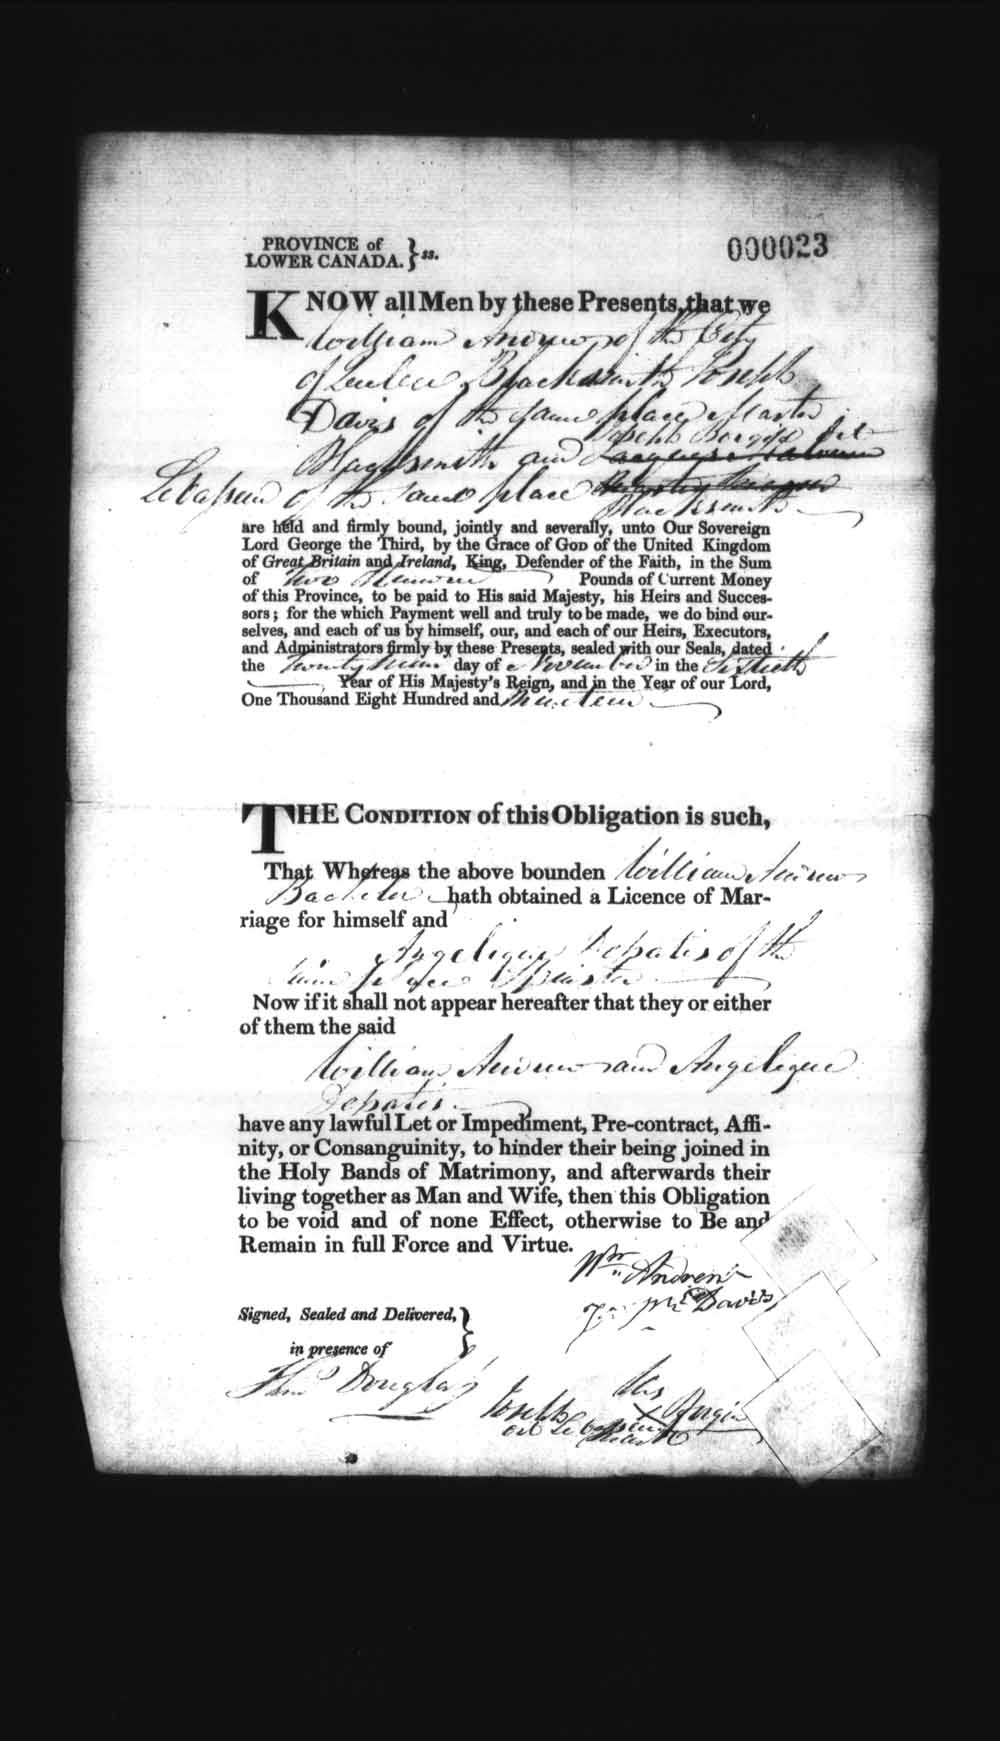 Digitized page of Upper and Lower Canada Marriage Bonds (1779-1865) for Image No.: e008235834